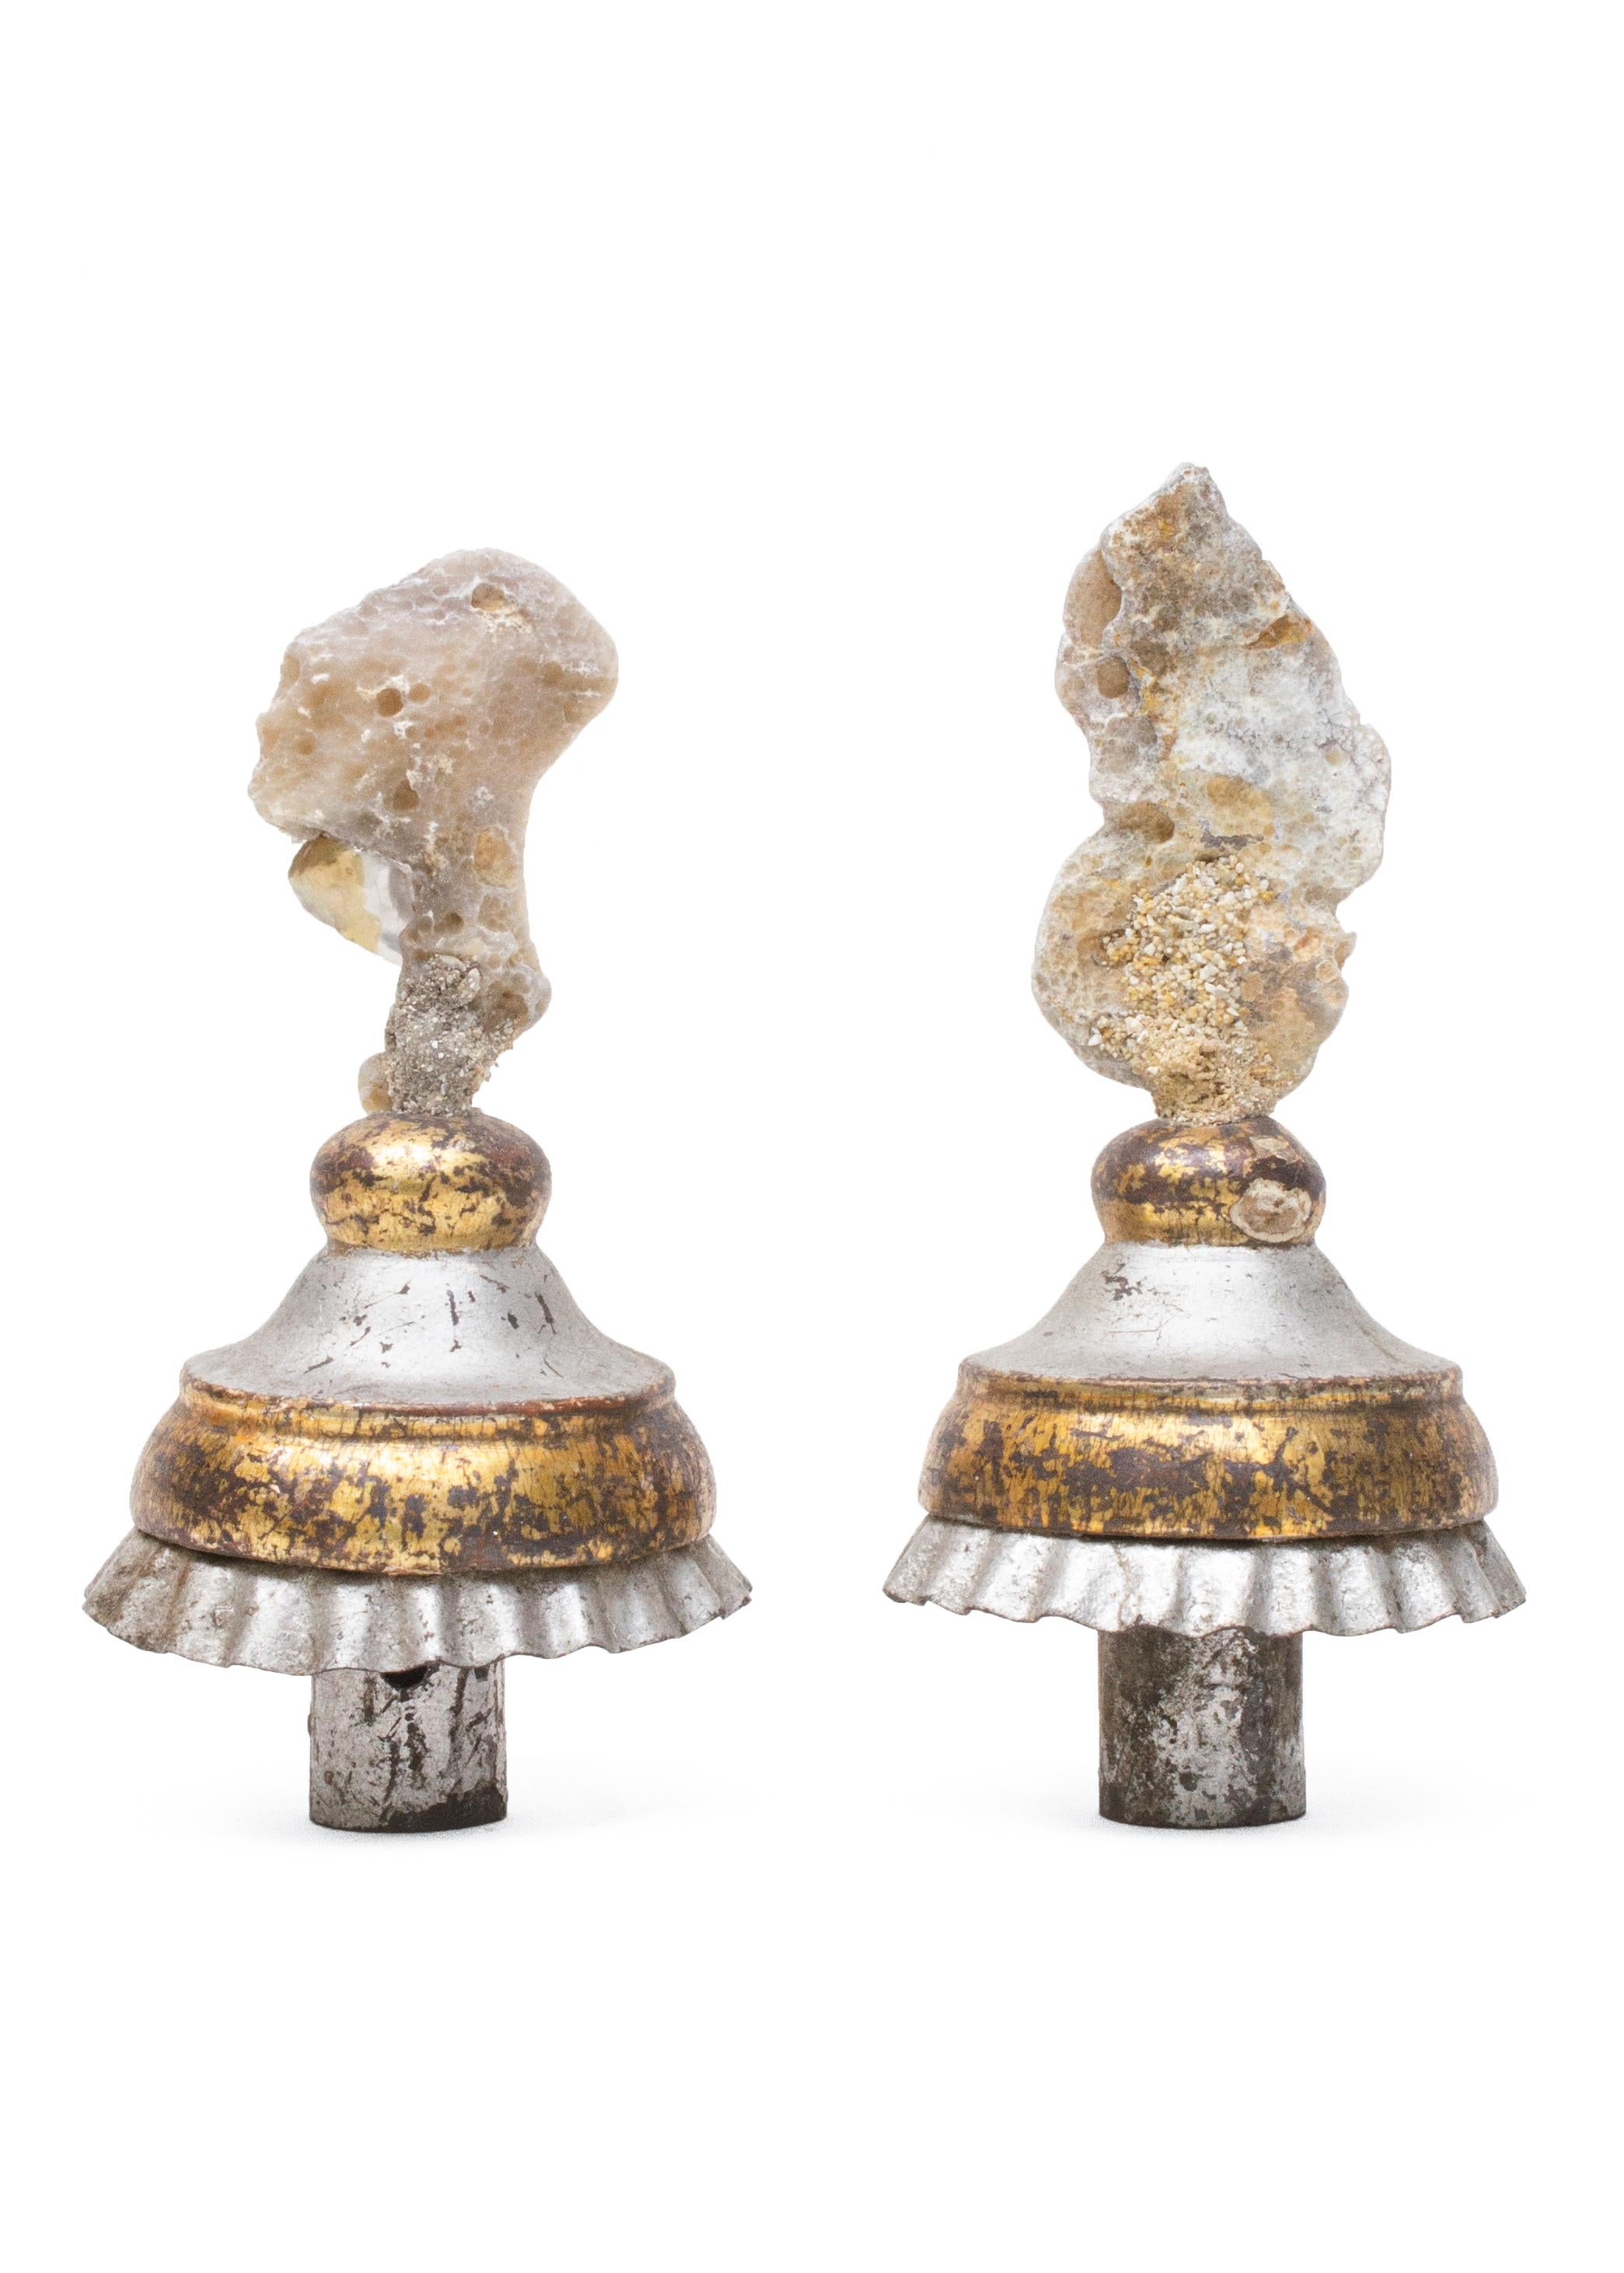 A pair of 18th century Italian gold and silver leaf candlestick tops with agate coral and baroque pearls.

The hand-carved, silver and gold leaf candlestick tops originally came from a candlestick from a church in Tuscany. They stand on the